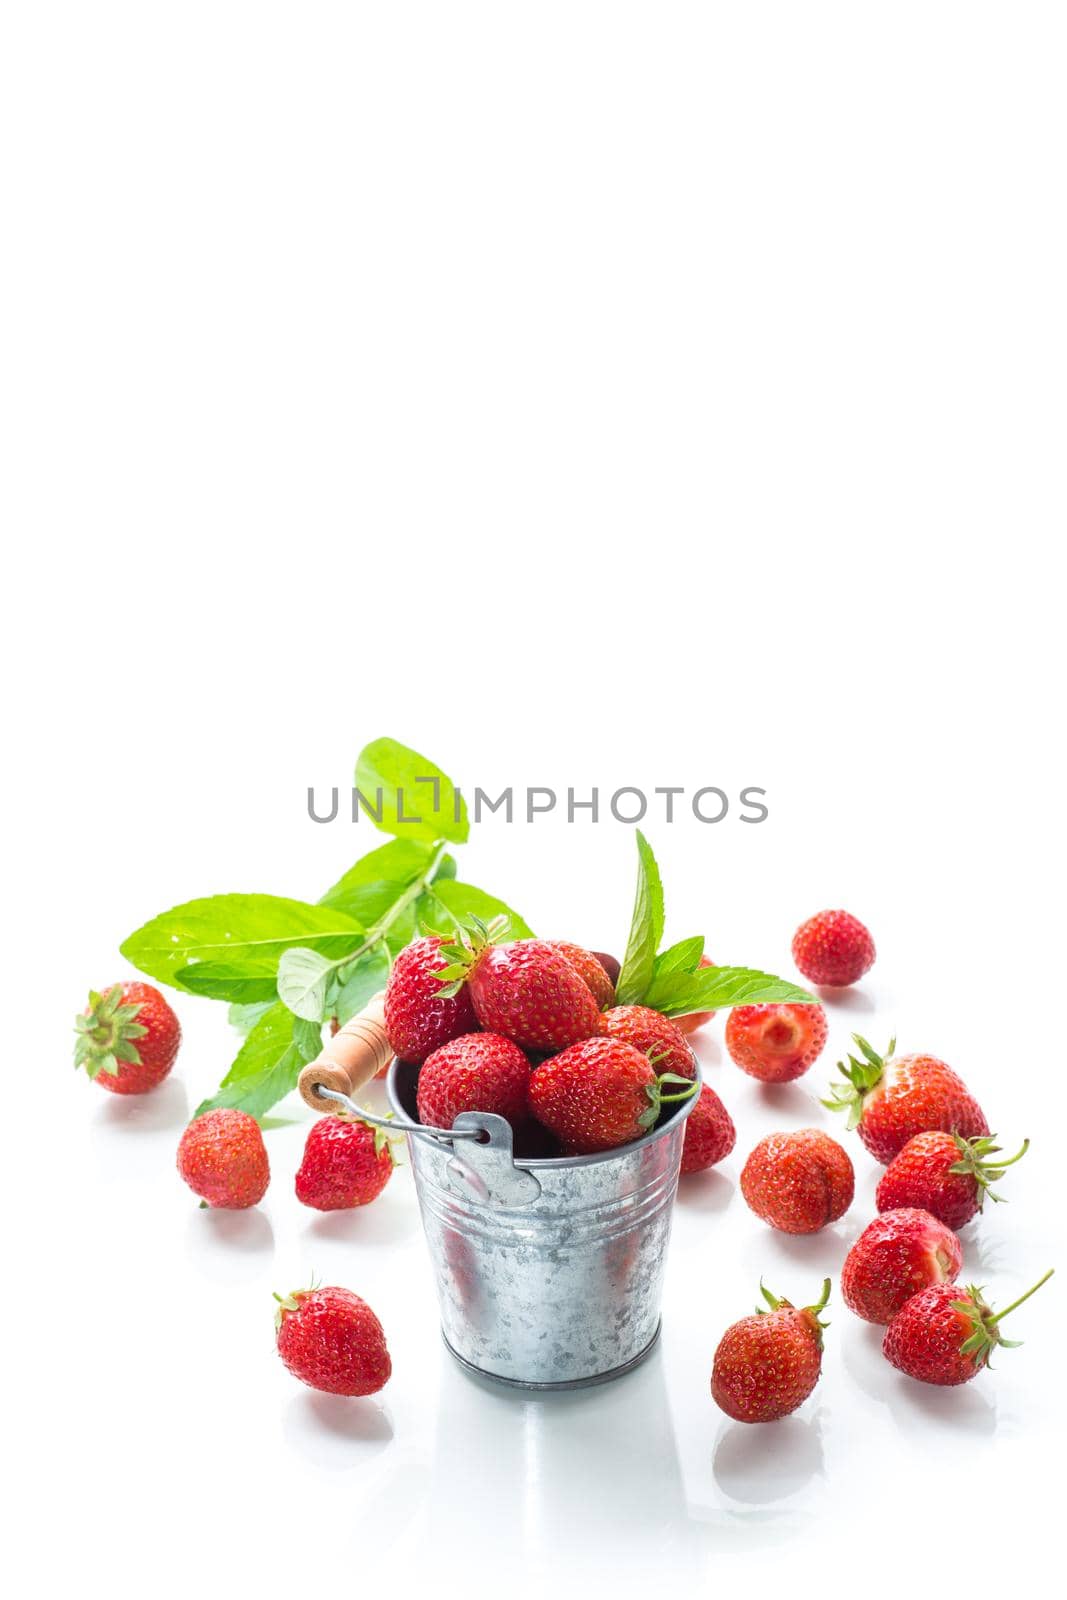 harvest of red ripe natural strawberries isolated on white background